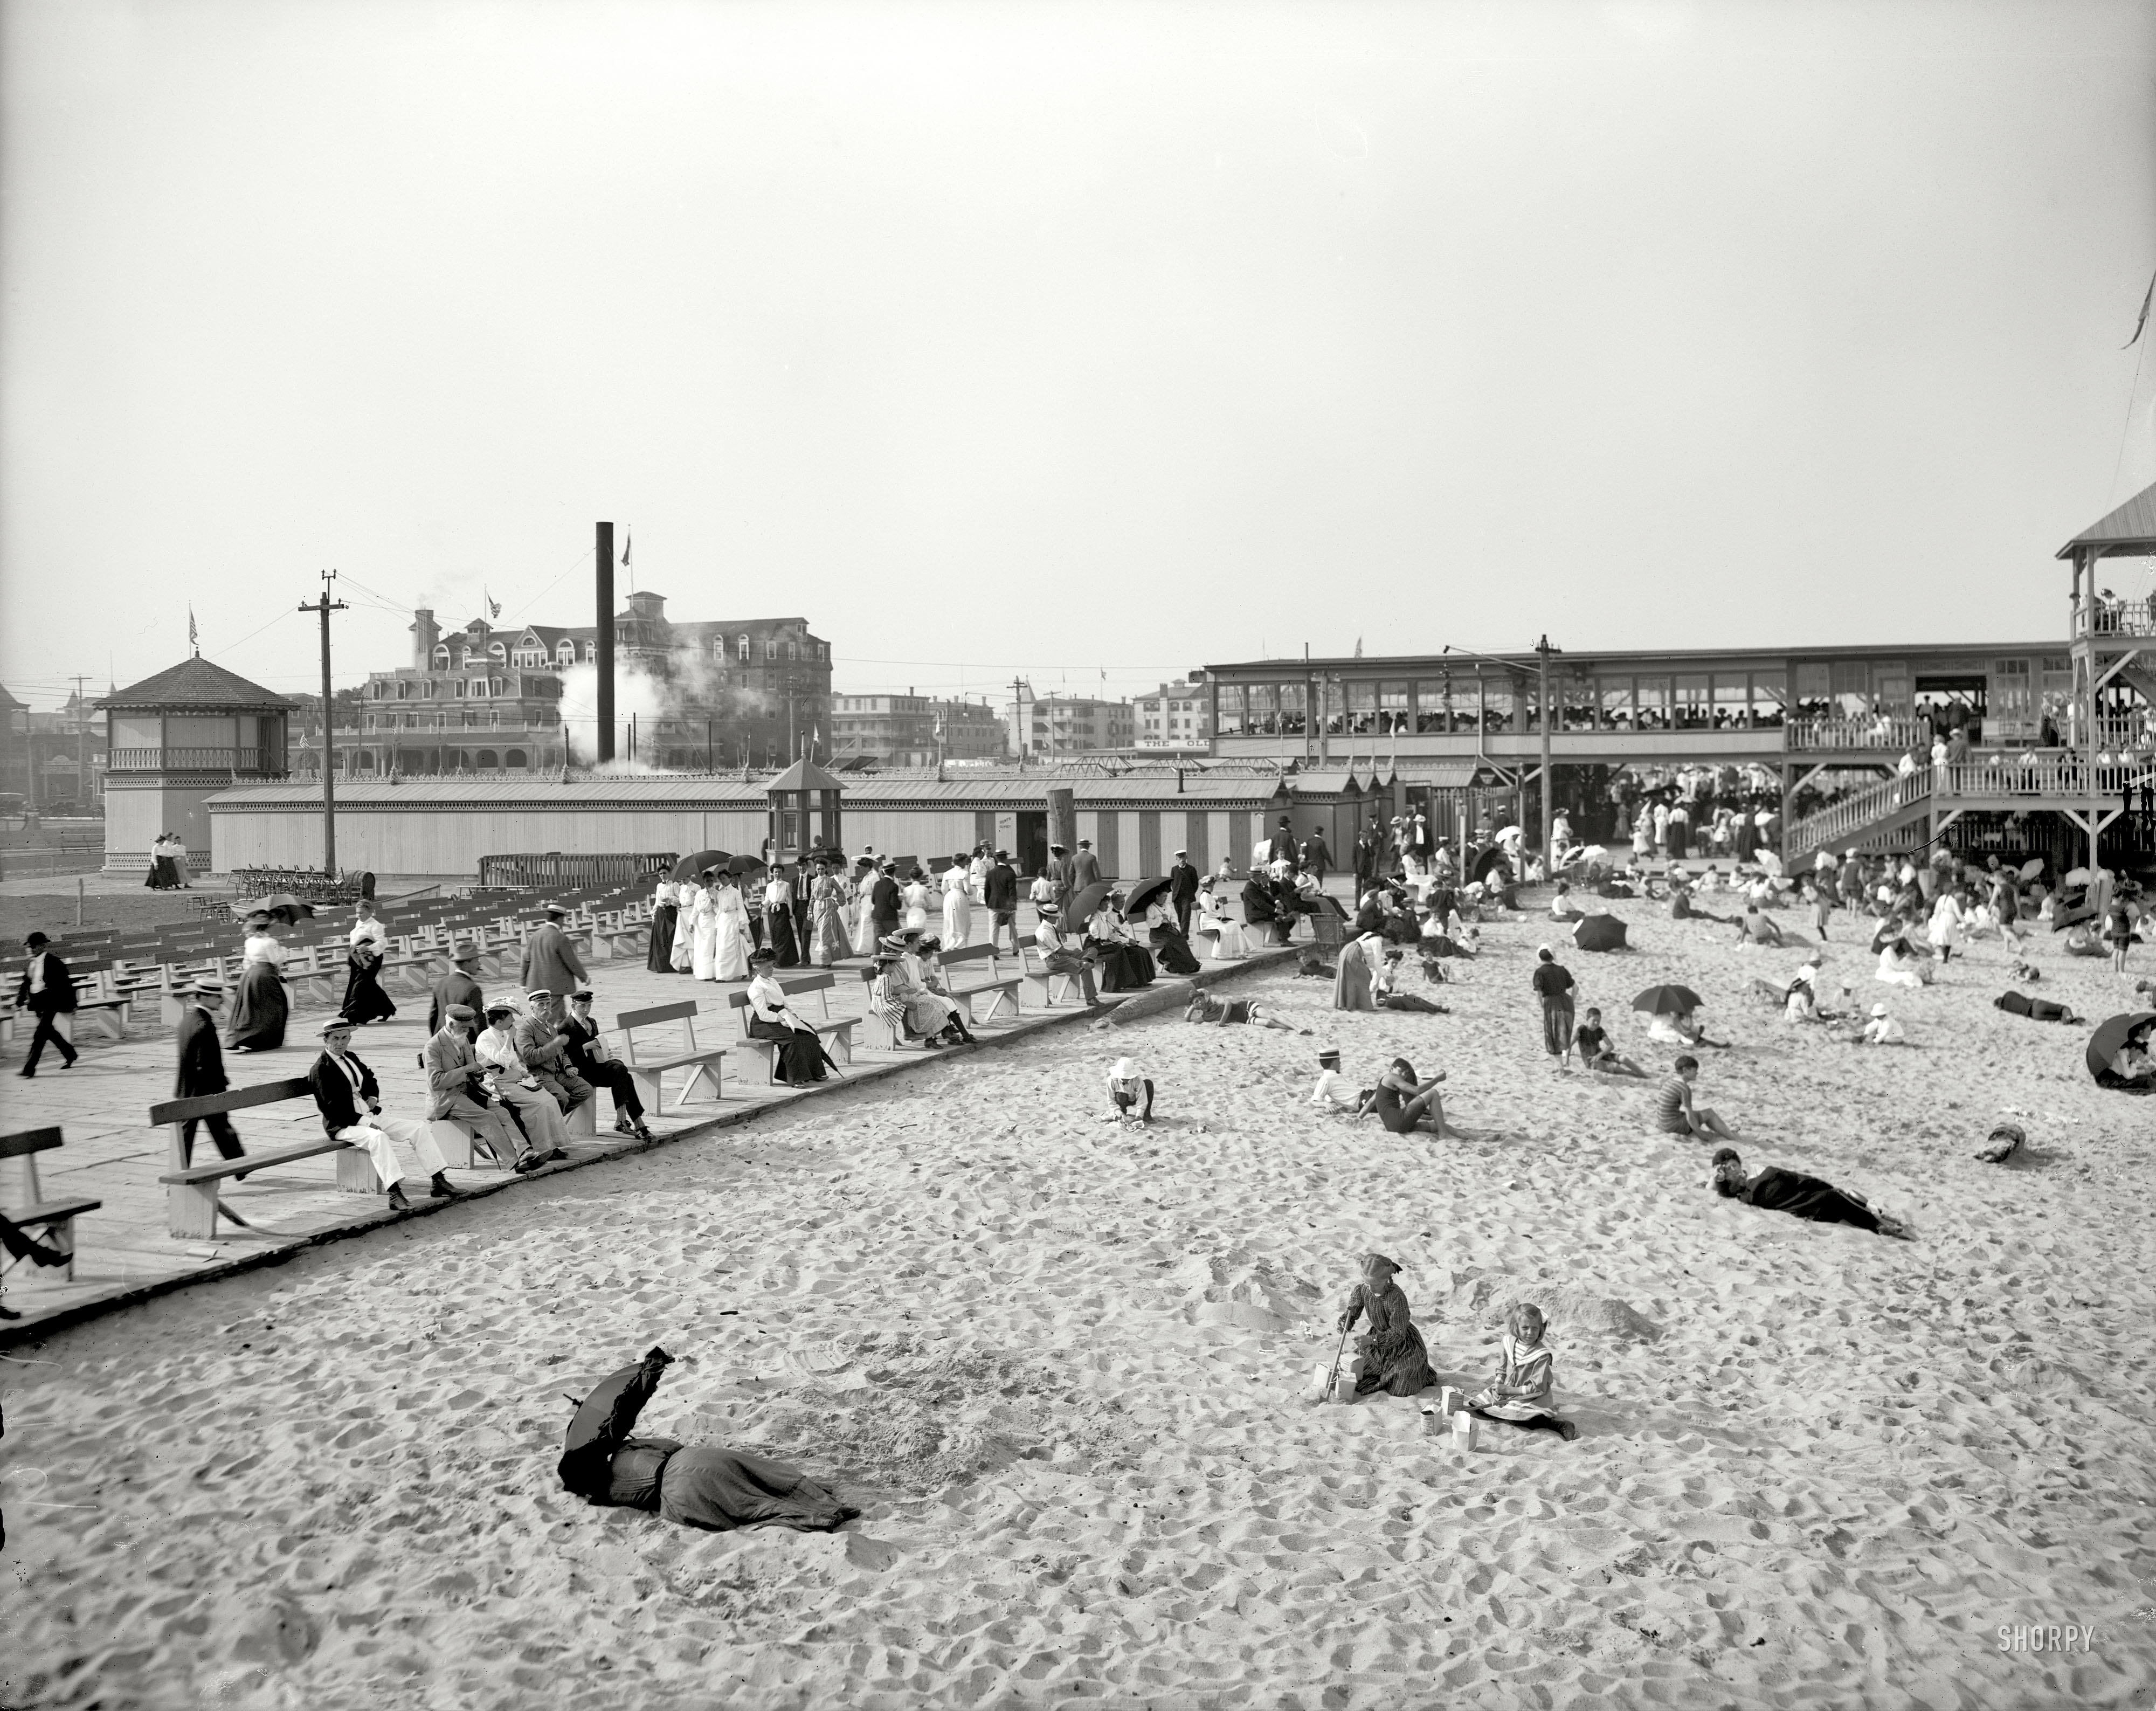 The Jersey Shore circa 1905. "Pavilion and beach, Asbury Park." 8x10 inch dry plate glass negative, Detroit Publishing Company. View full size.